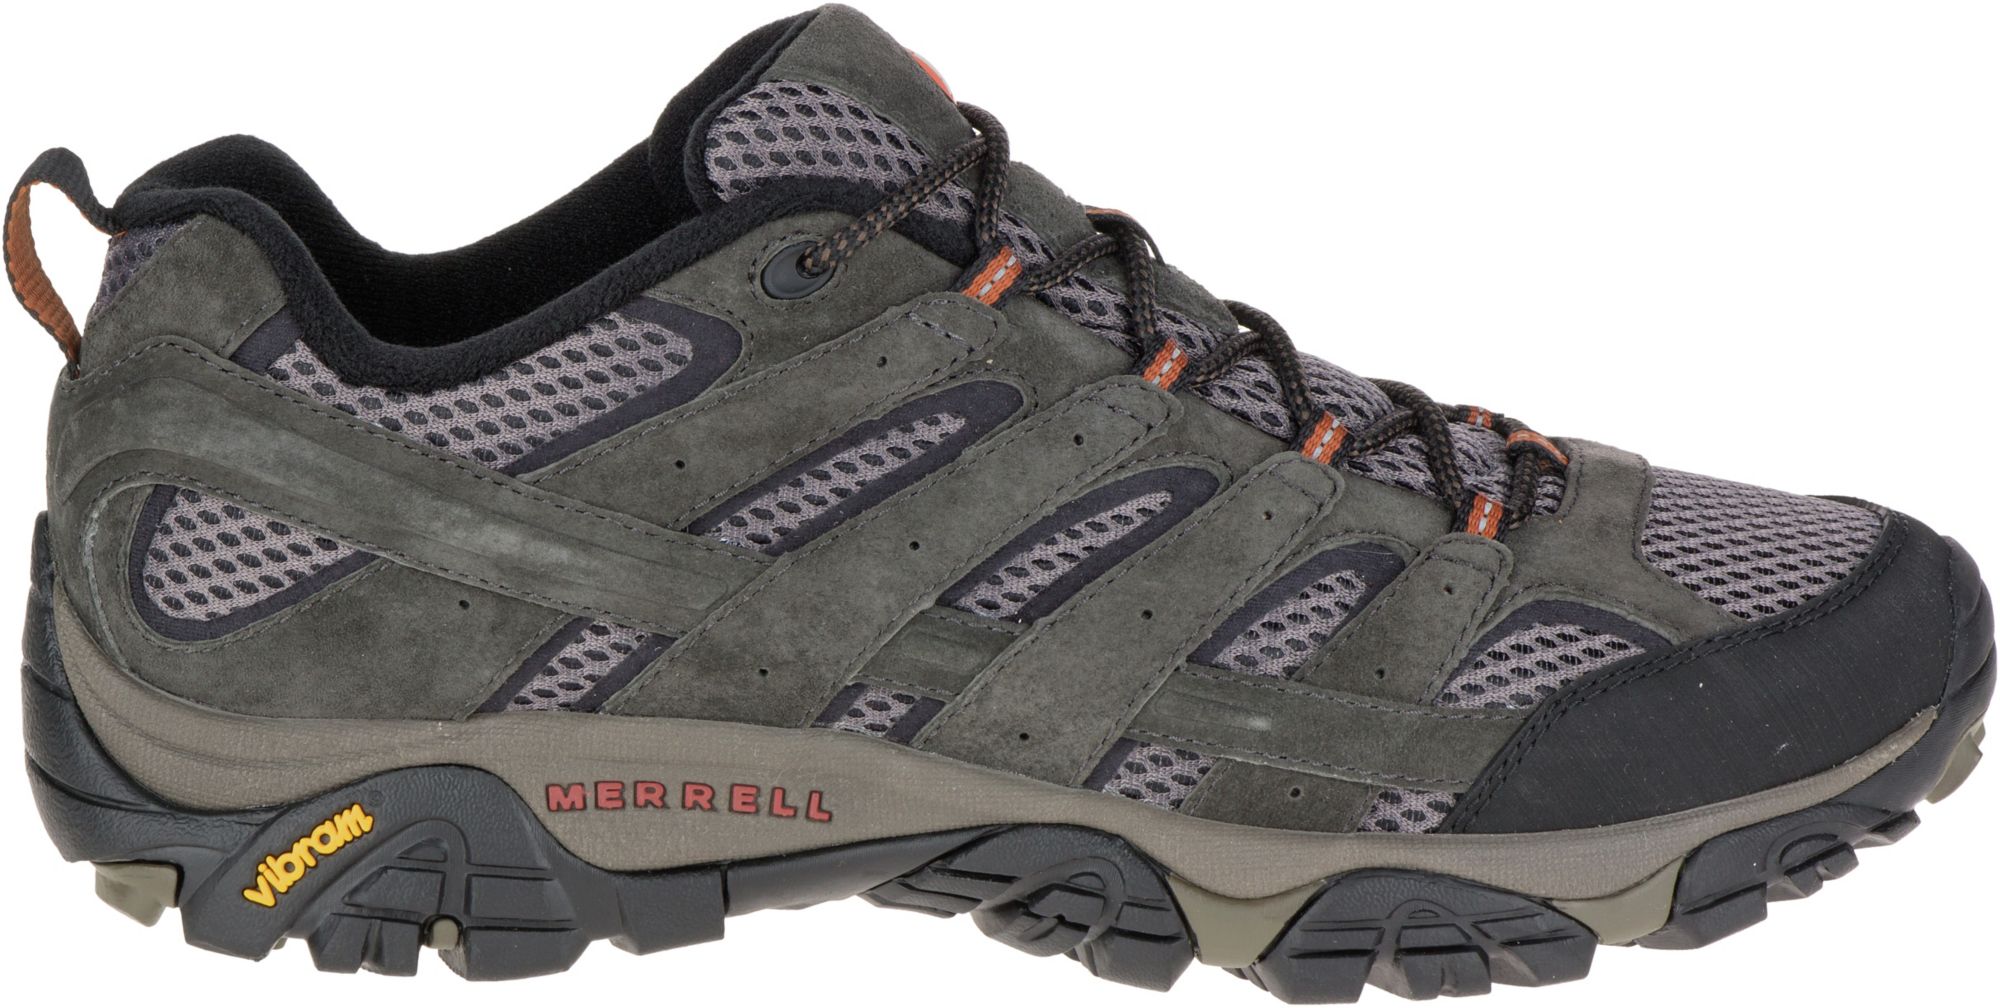 merrell men's moab 2 vent wide hiking shoes